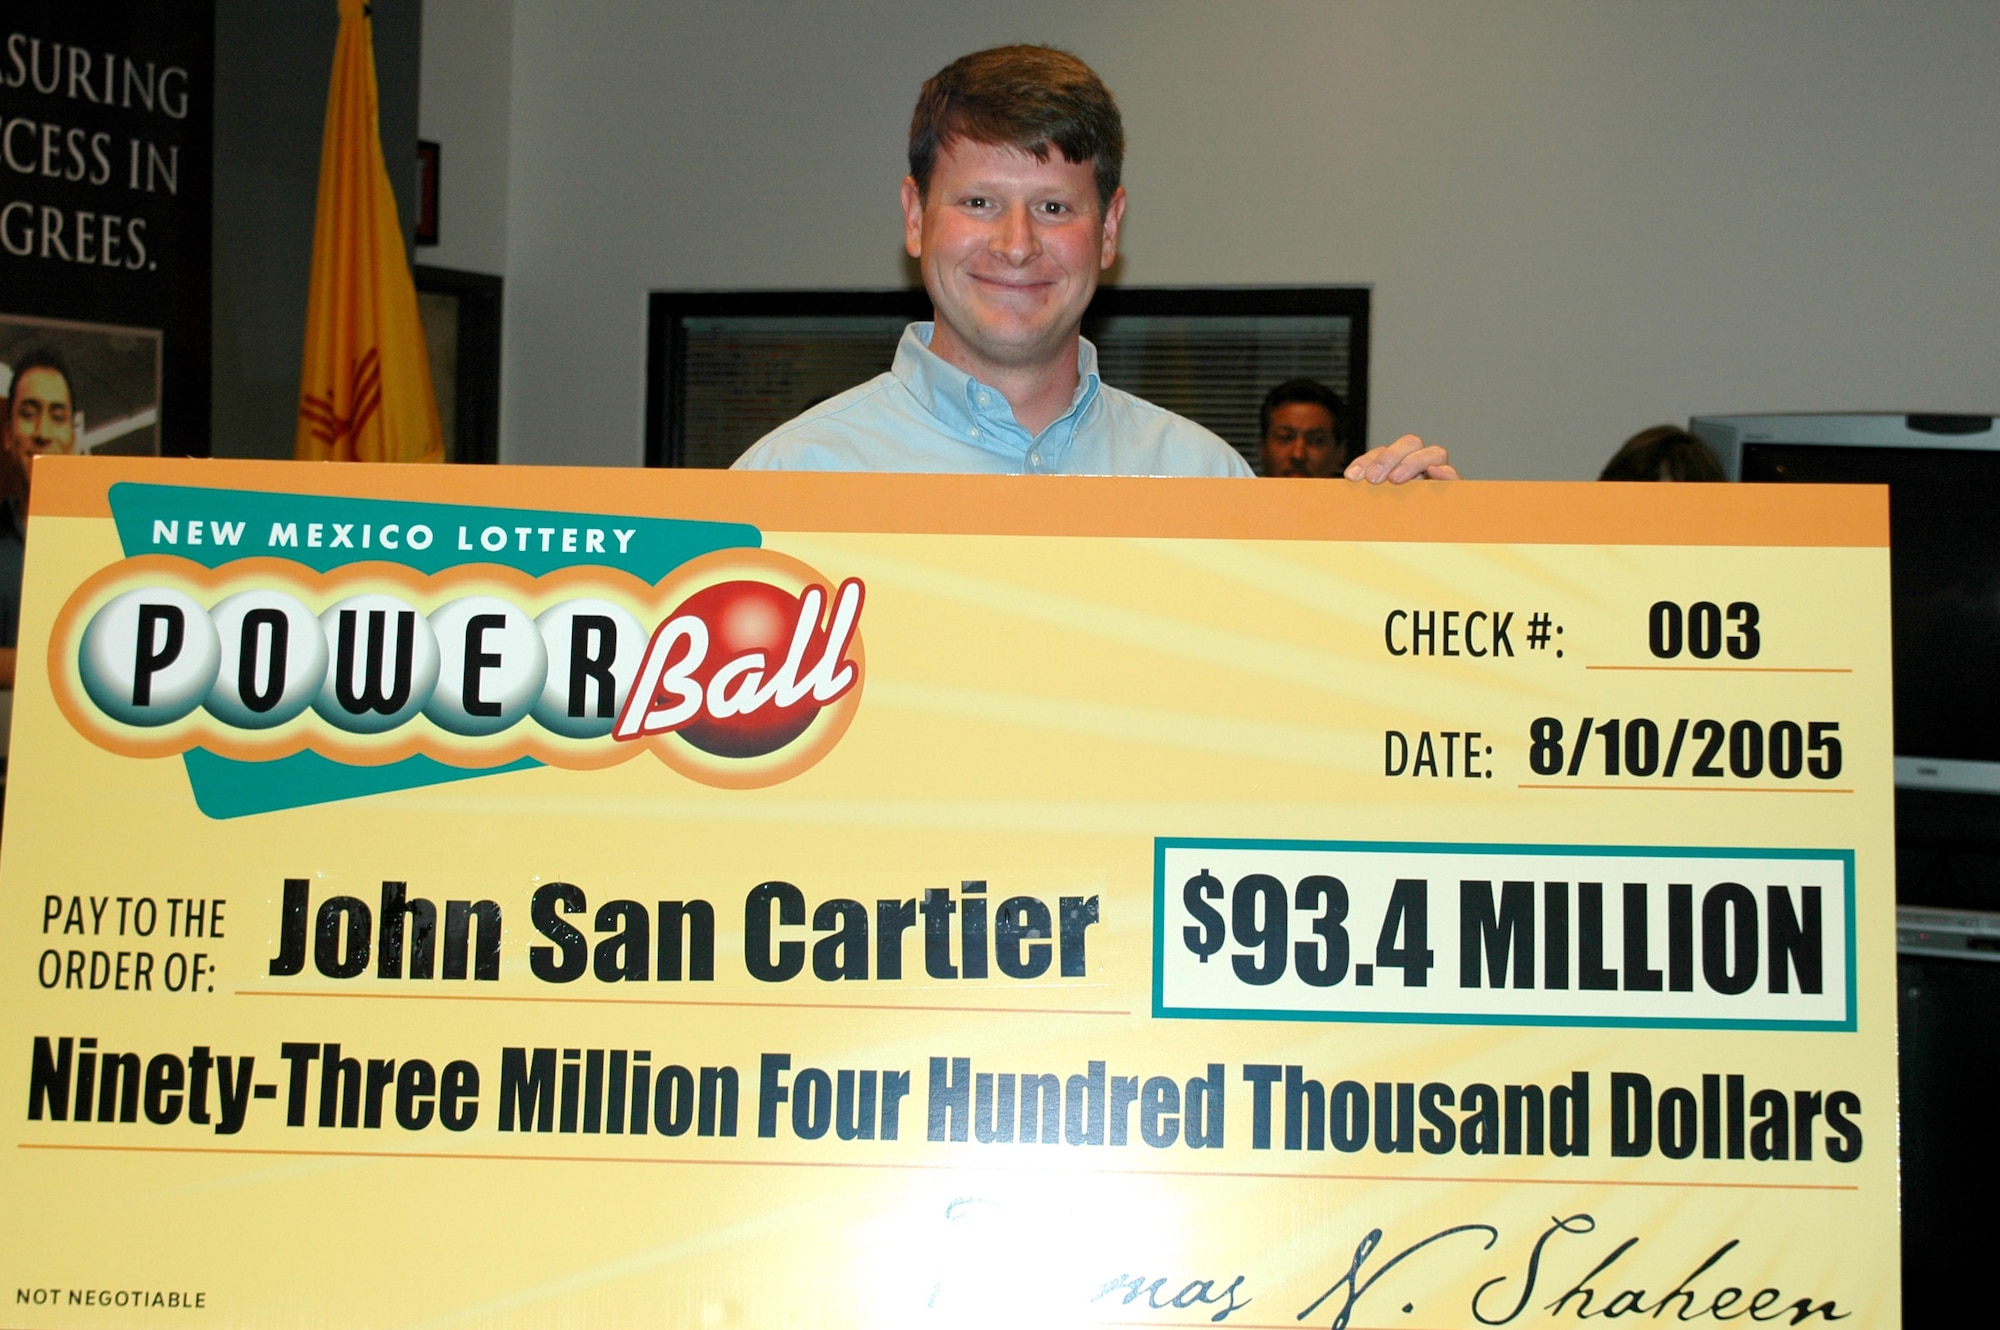 KIRTLAND AIR FORCE BASE, N.M. -- Master Sgt. John San Cartier holds his winning lottery check for $93.4 million. He is a special operations loadmaster instructor with the 58th Training Squadron here. (U.S. Air Force photo)